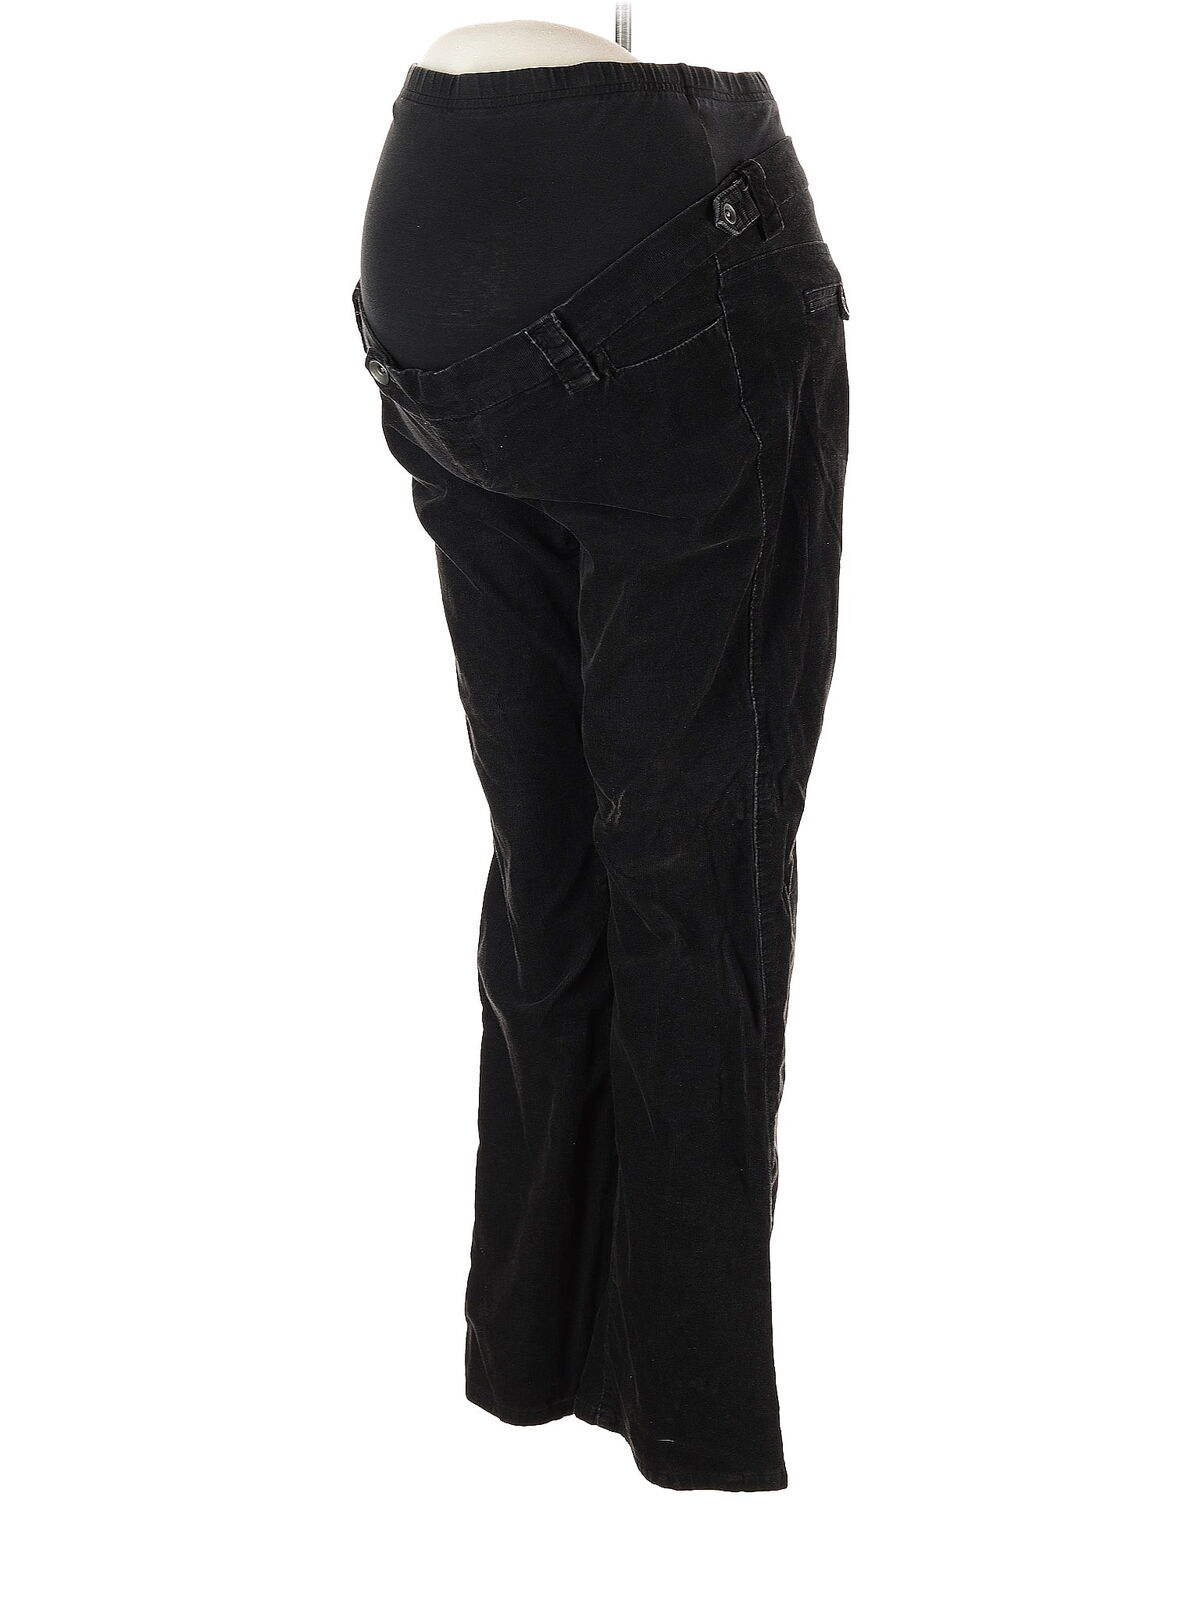 Old Navy - Maternity Women Black Casual Pants S M… - image 1